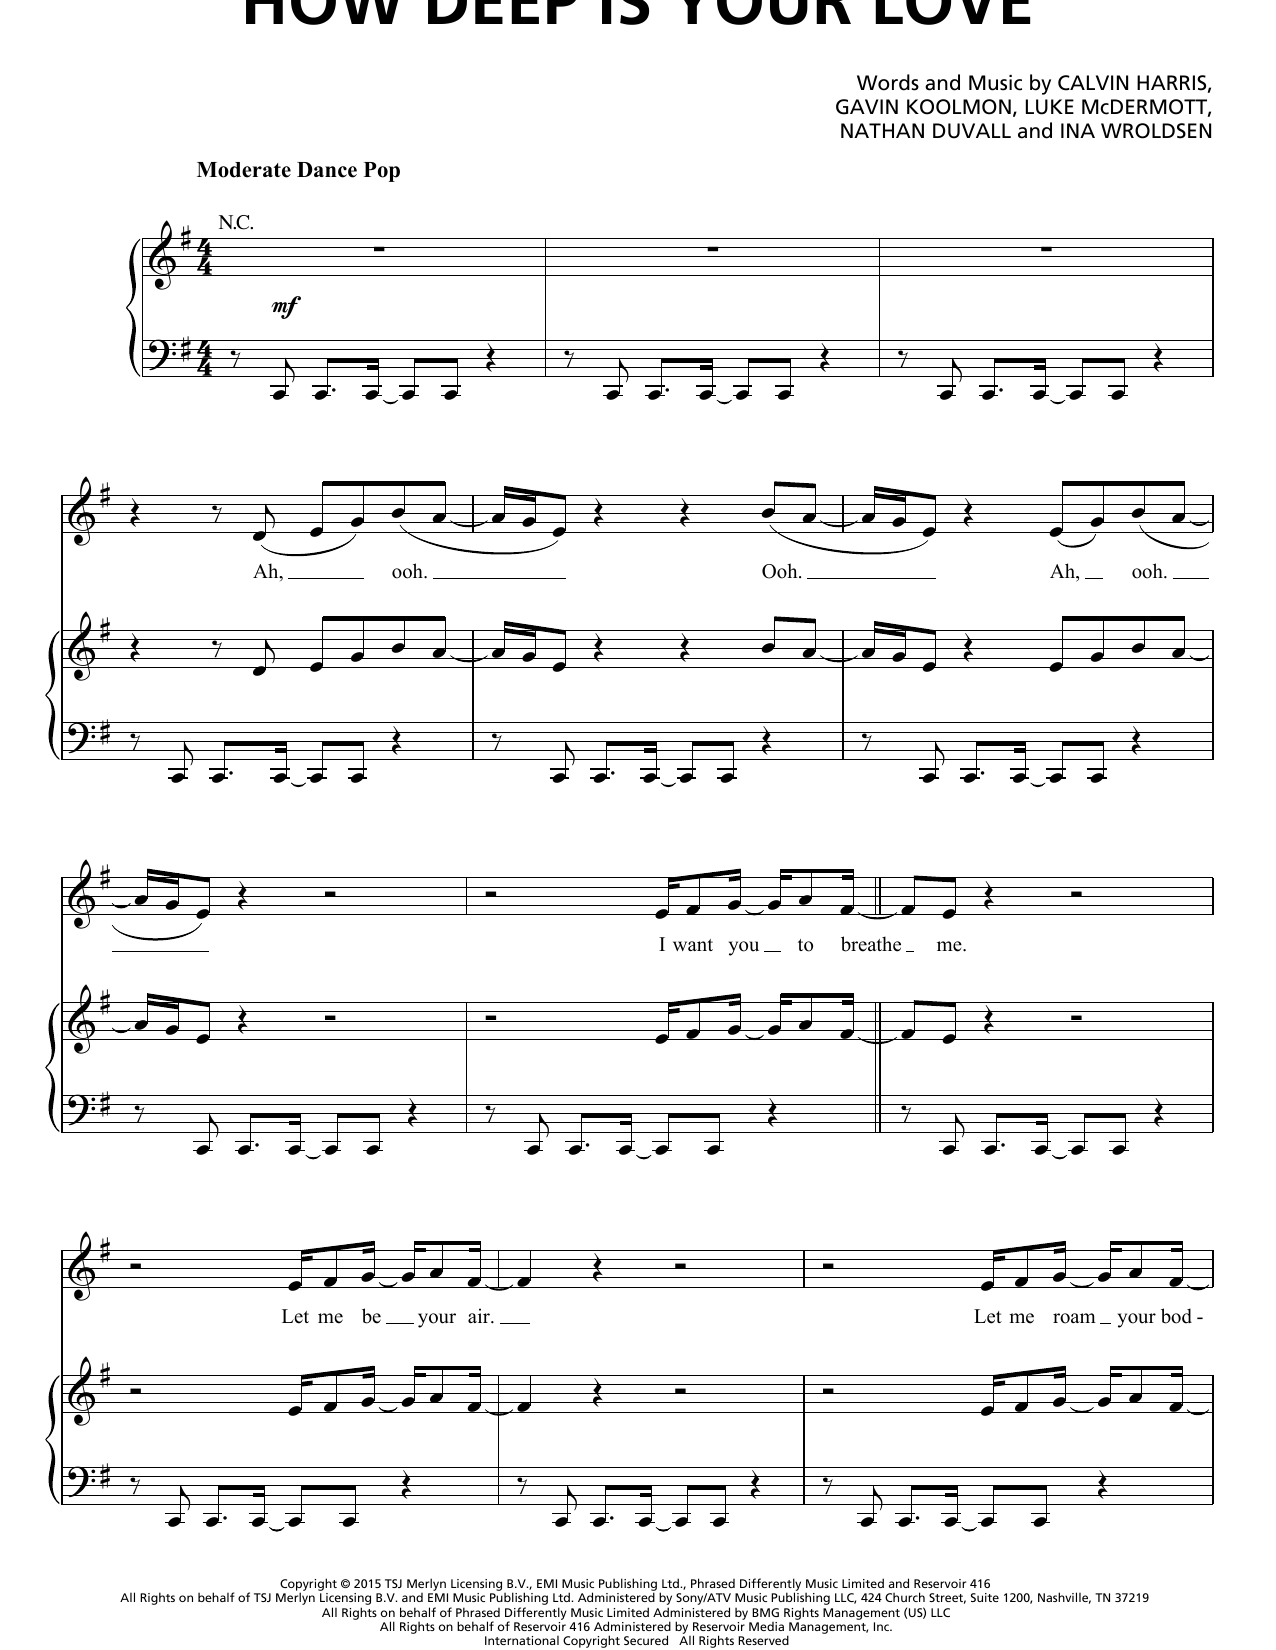 Calvin Harris And Disciples How Deep Is Your Love Sheet Music